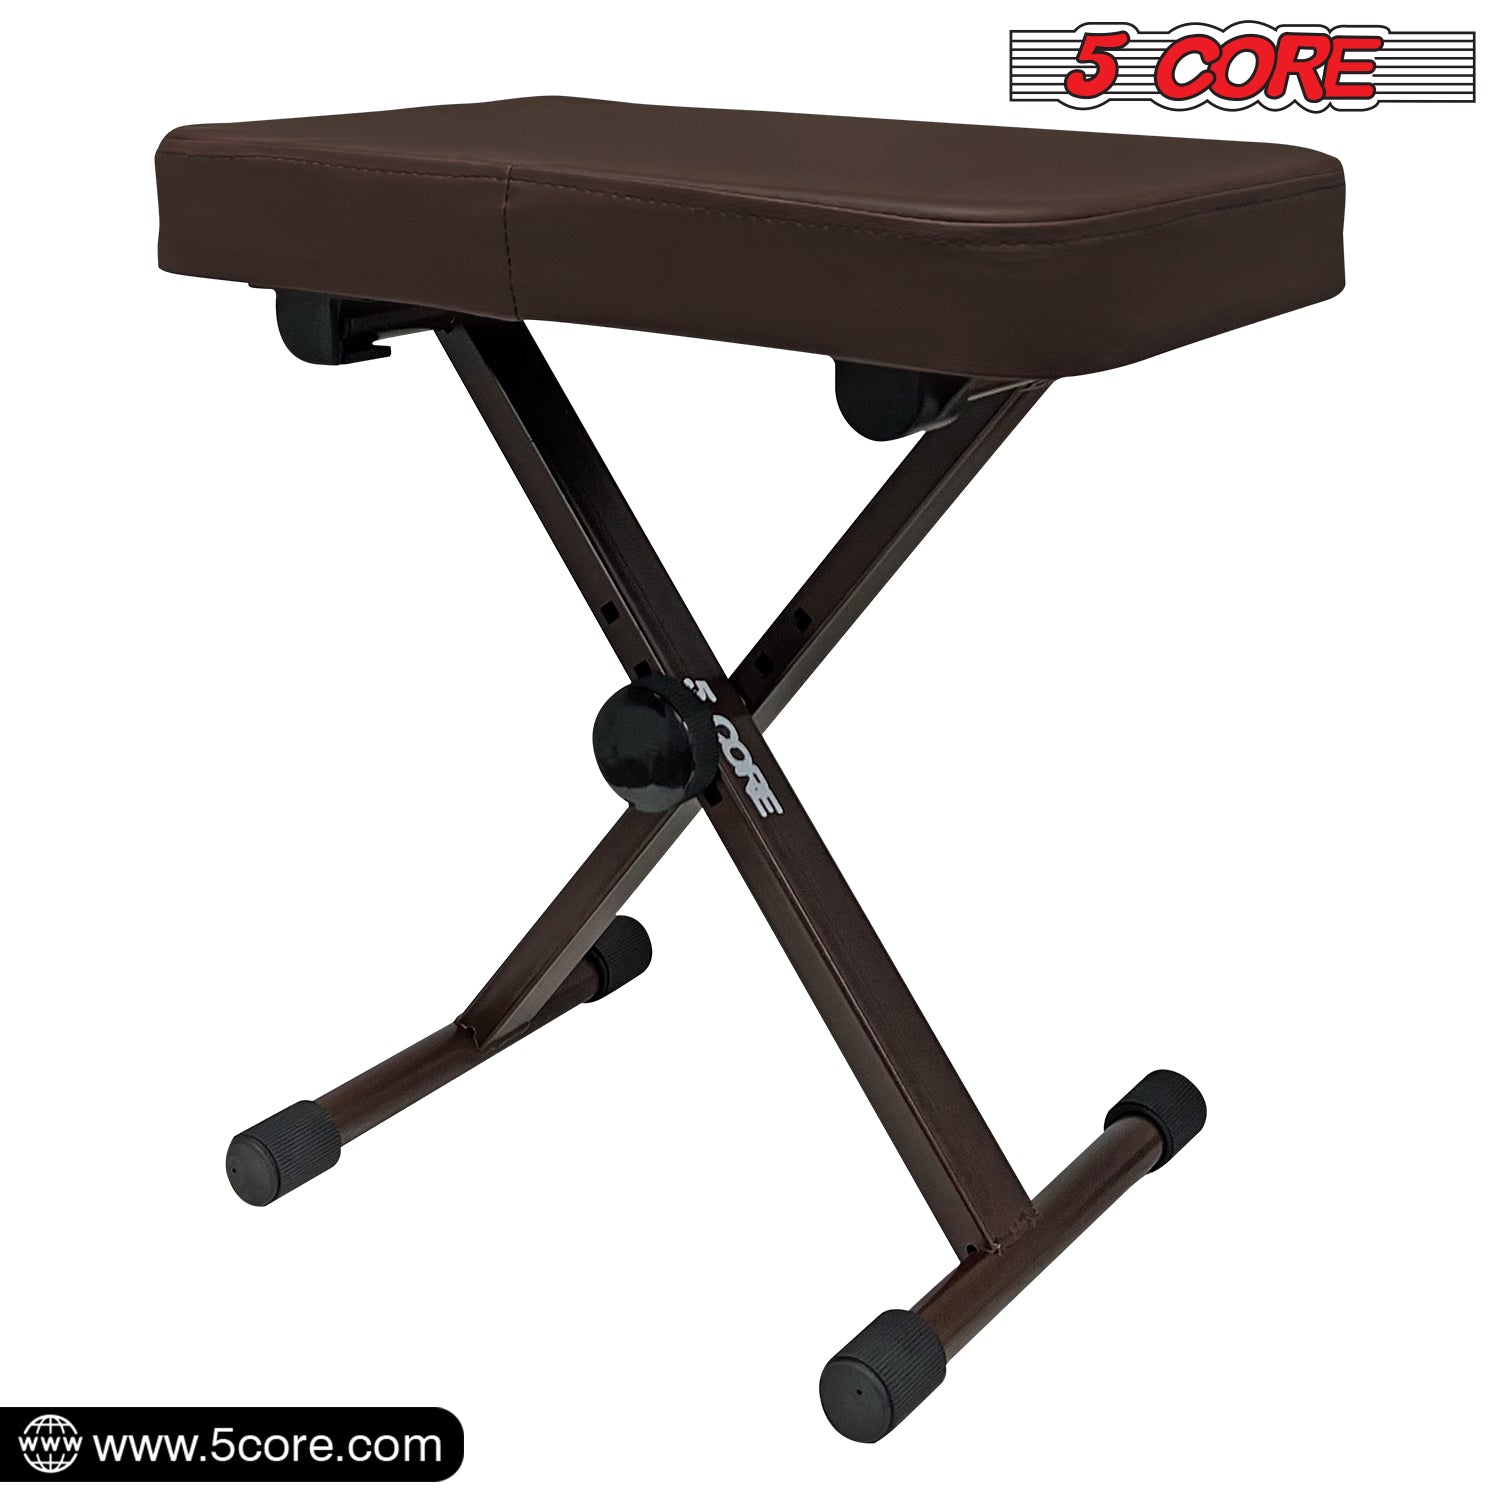 5 Core Adjustable Keyboard Bench 18.5 - 24.2 Inch Heavy Duty X style Bench Piano Stool Chair Thick And Padded Comfortable Guitar Stools -KBB BR HD